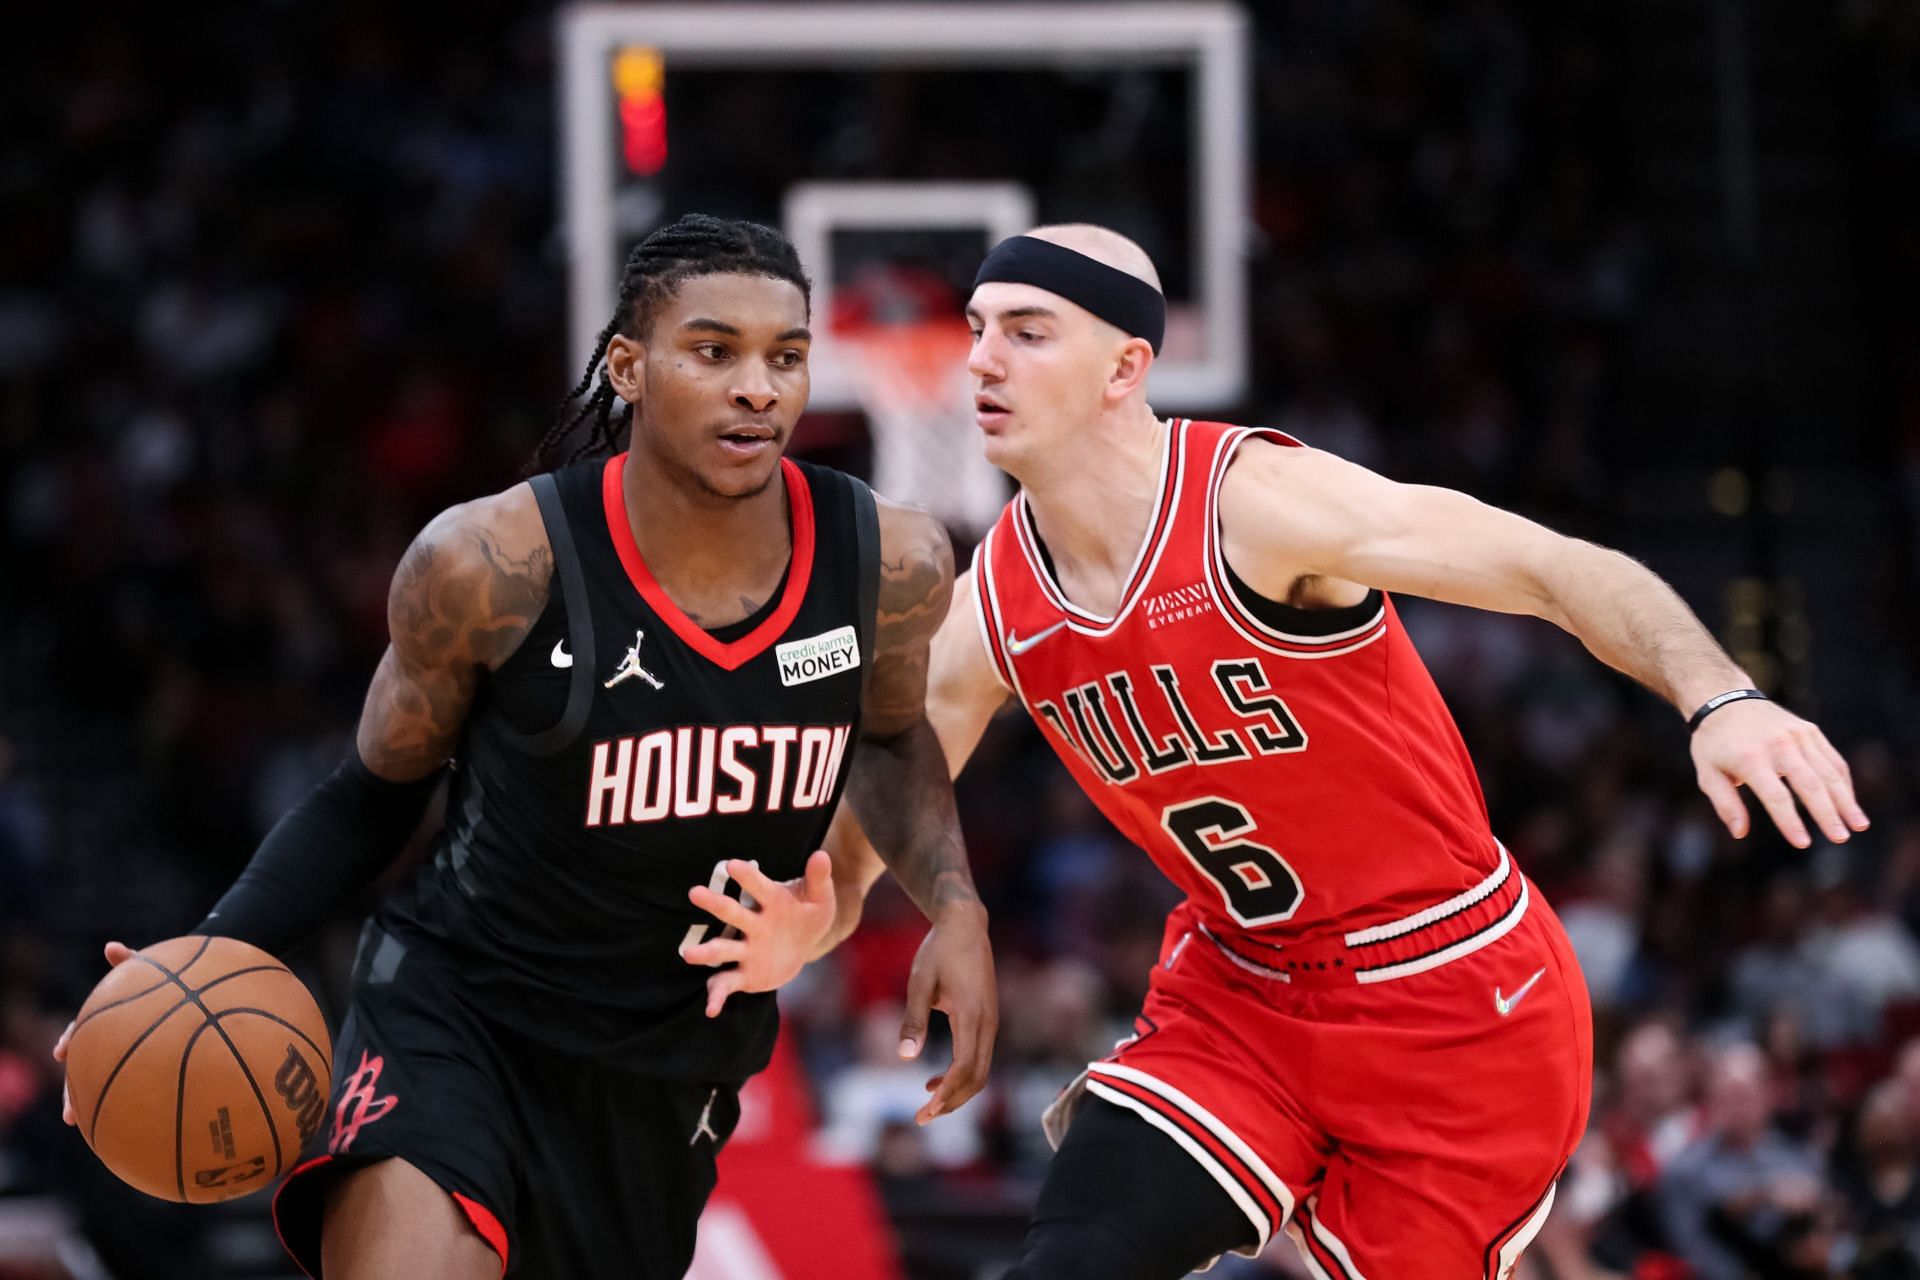 Houston Rockets: Sengun, Green and Porter out with injuries